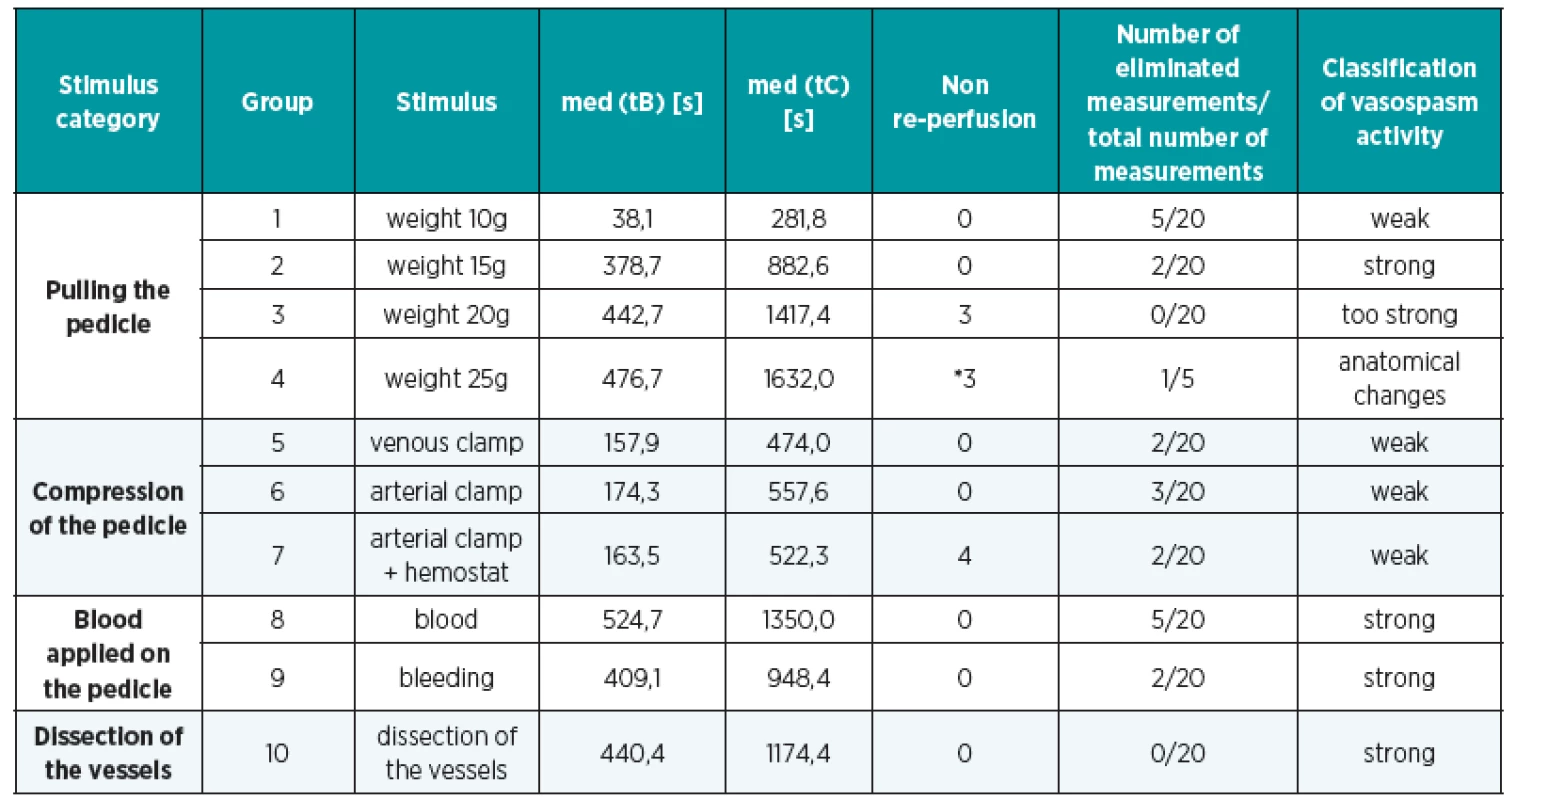 tB and tC median values and classification of vasospasm activity. The table shows the distribution of groups as well as their inclusion in the relevant stimulus category. Numbers of eliminated measurements and non reperfusions are mentioned